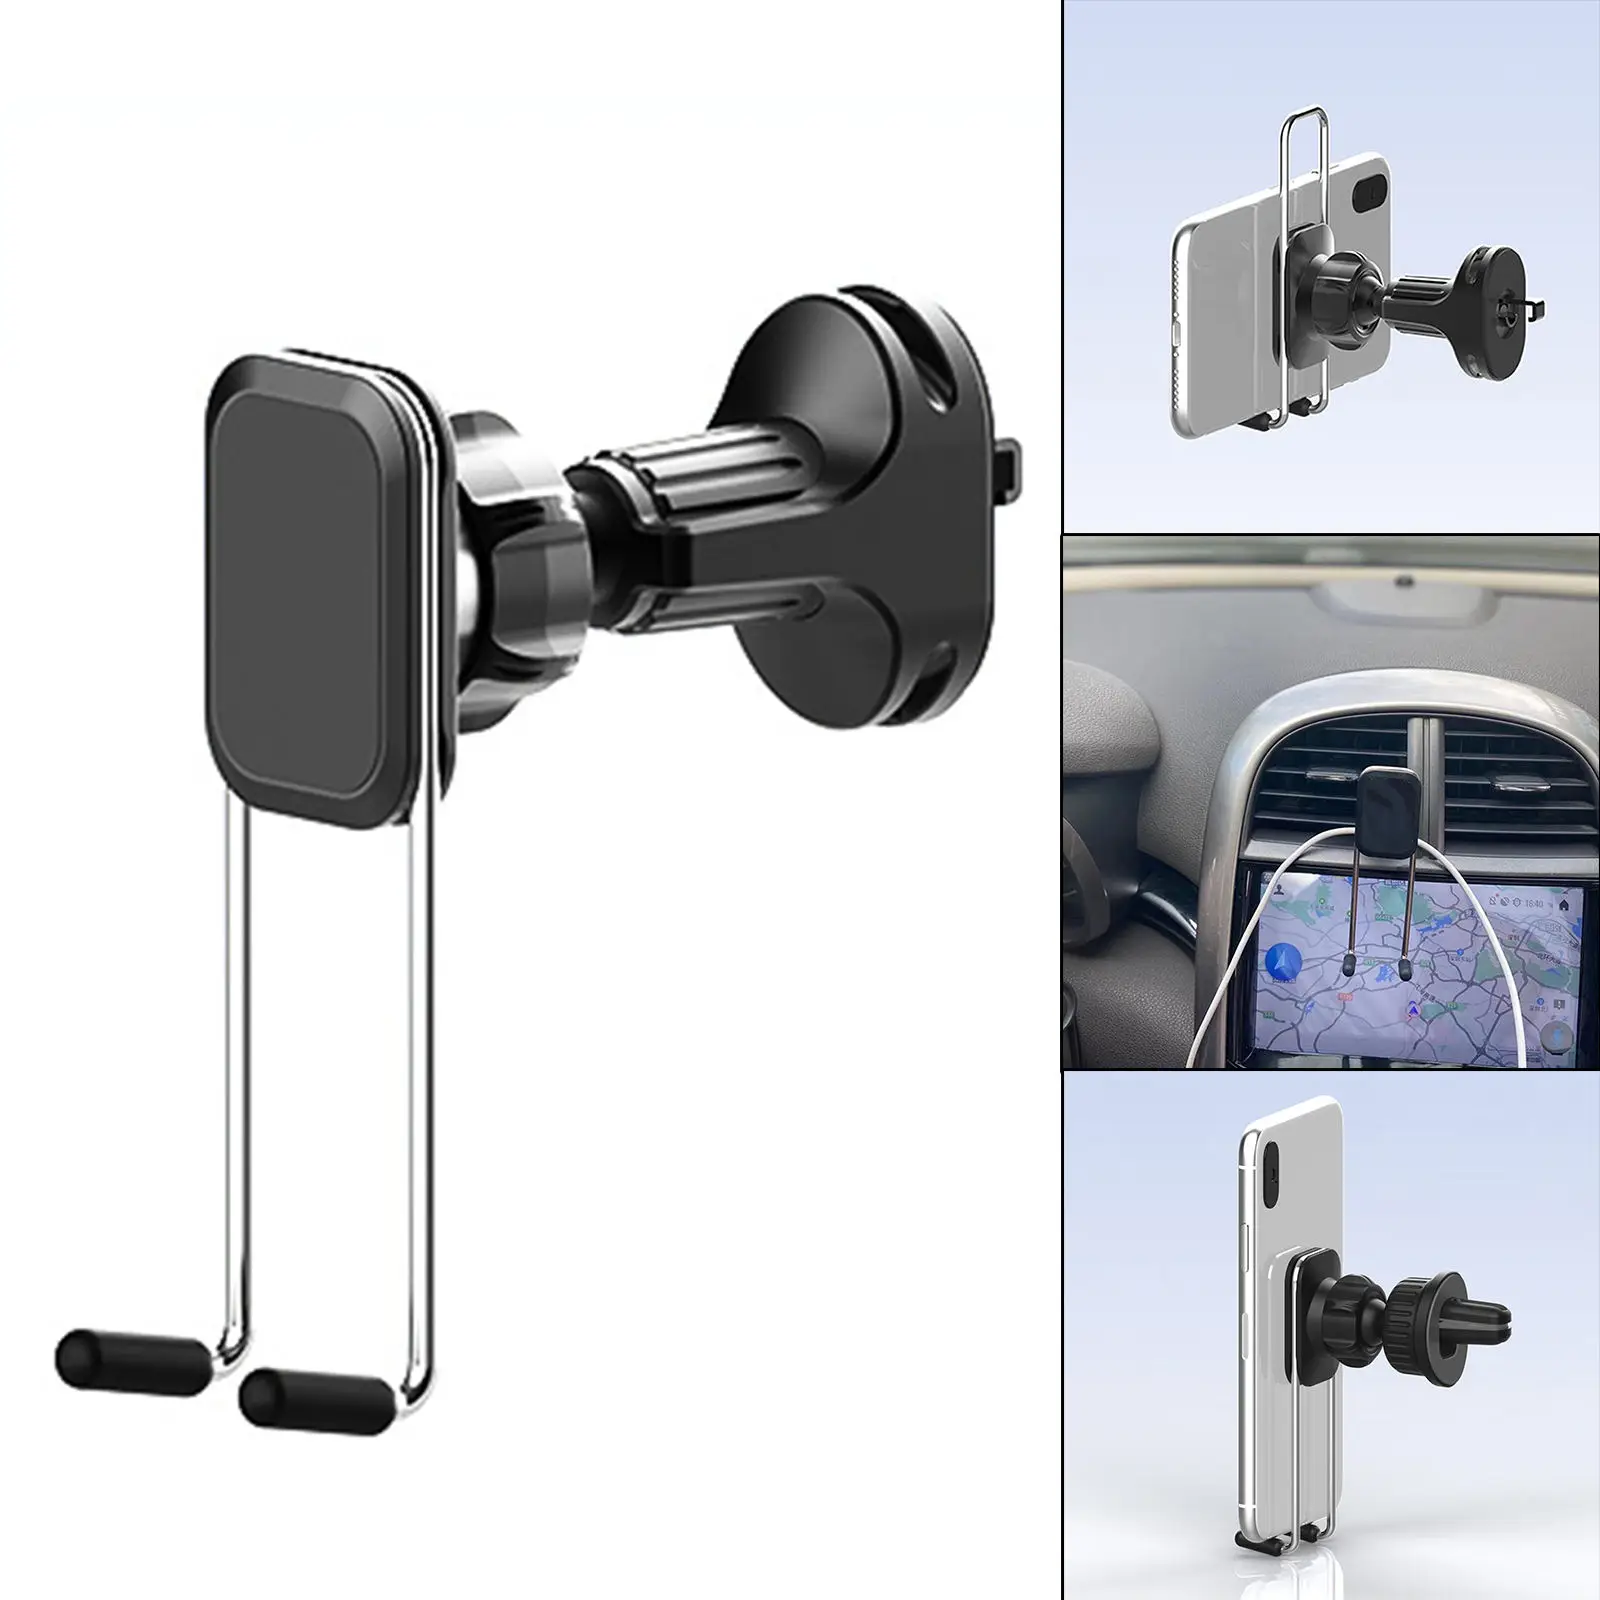 Magnetic Car Phone Mount Clip Air Vent Phone Holder Support Universal for Most Smartphones Mini Tablets